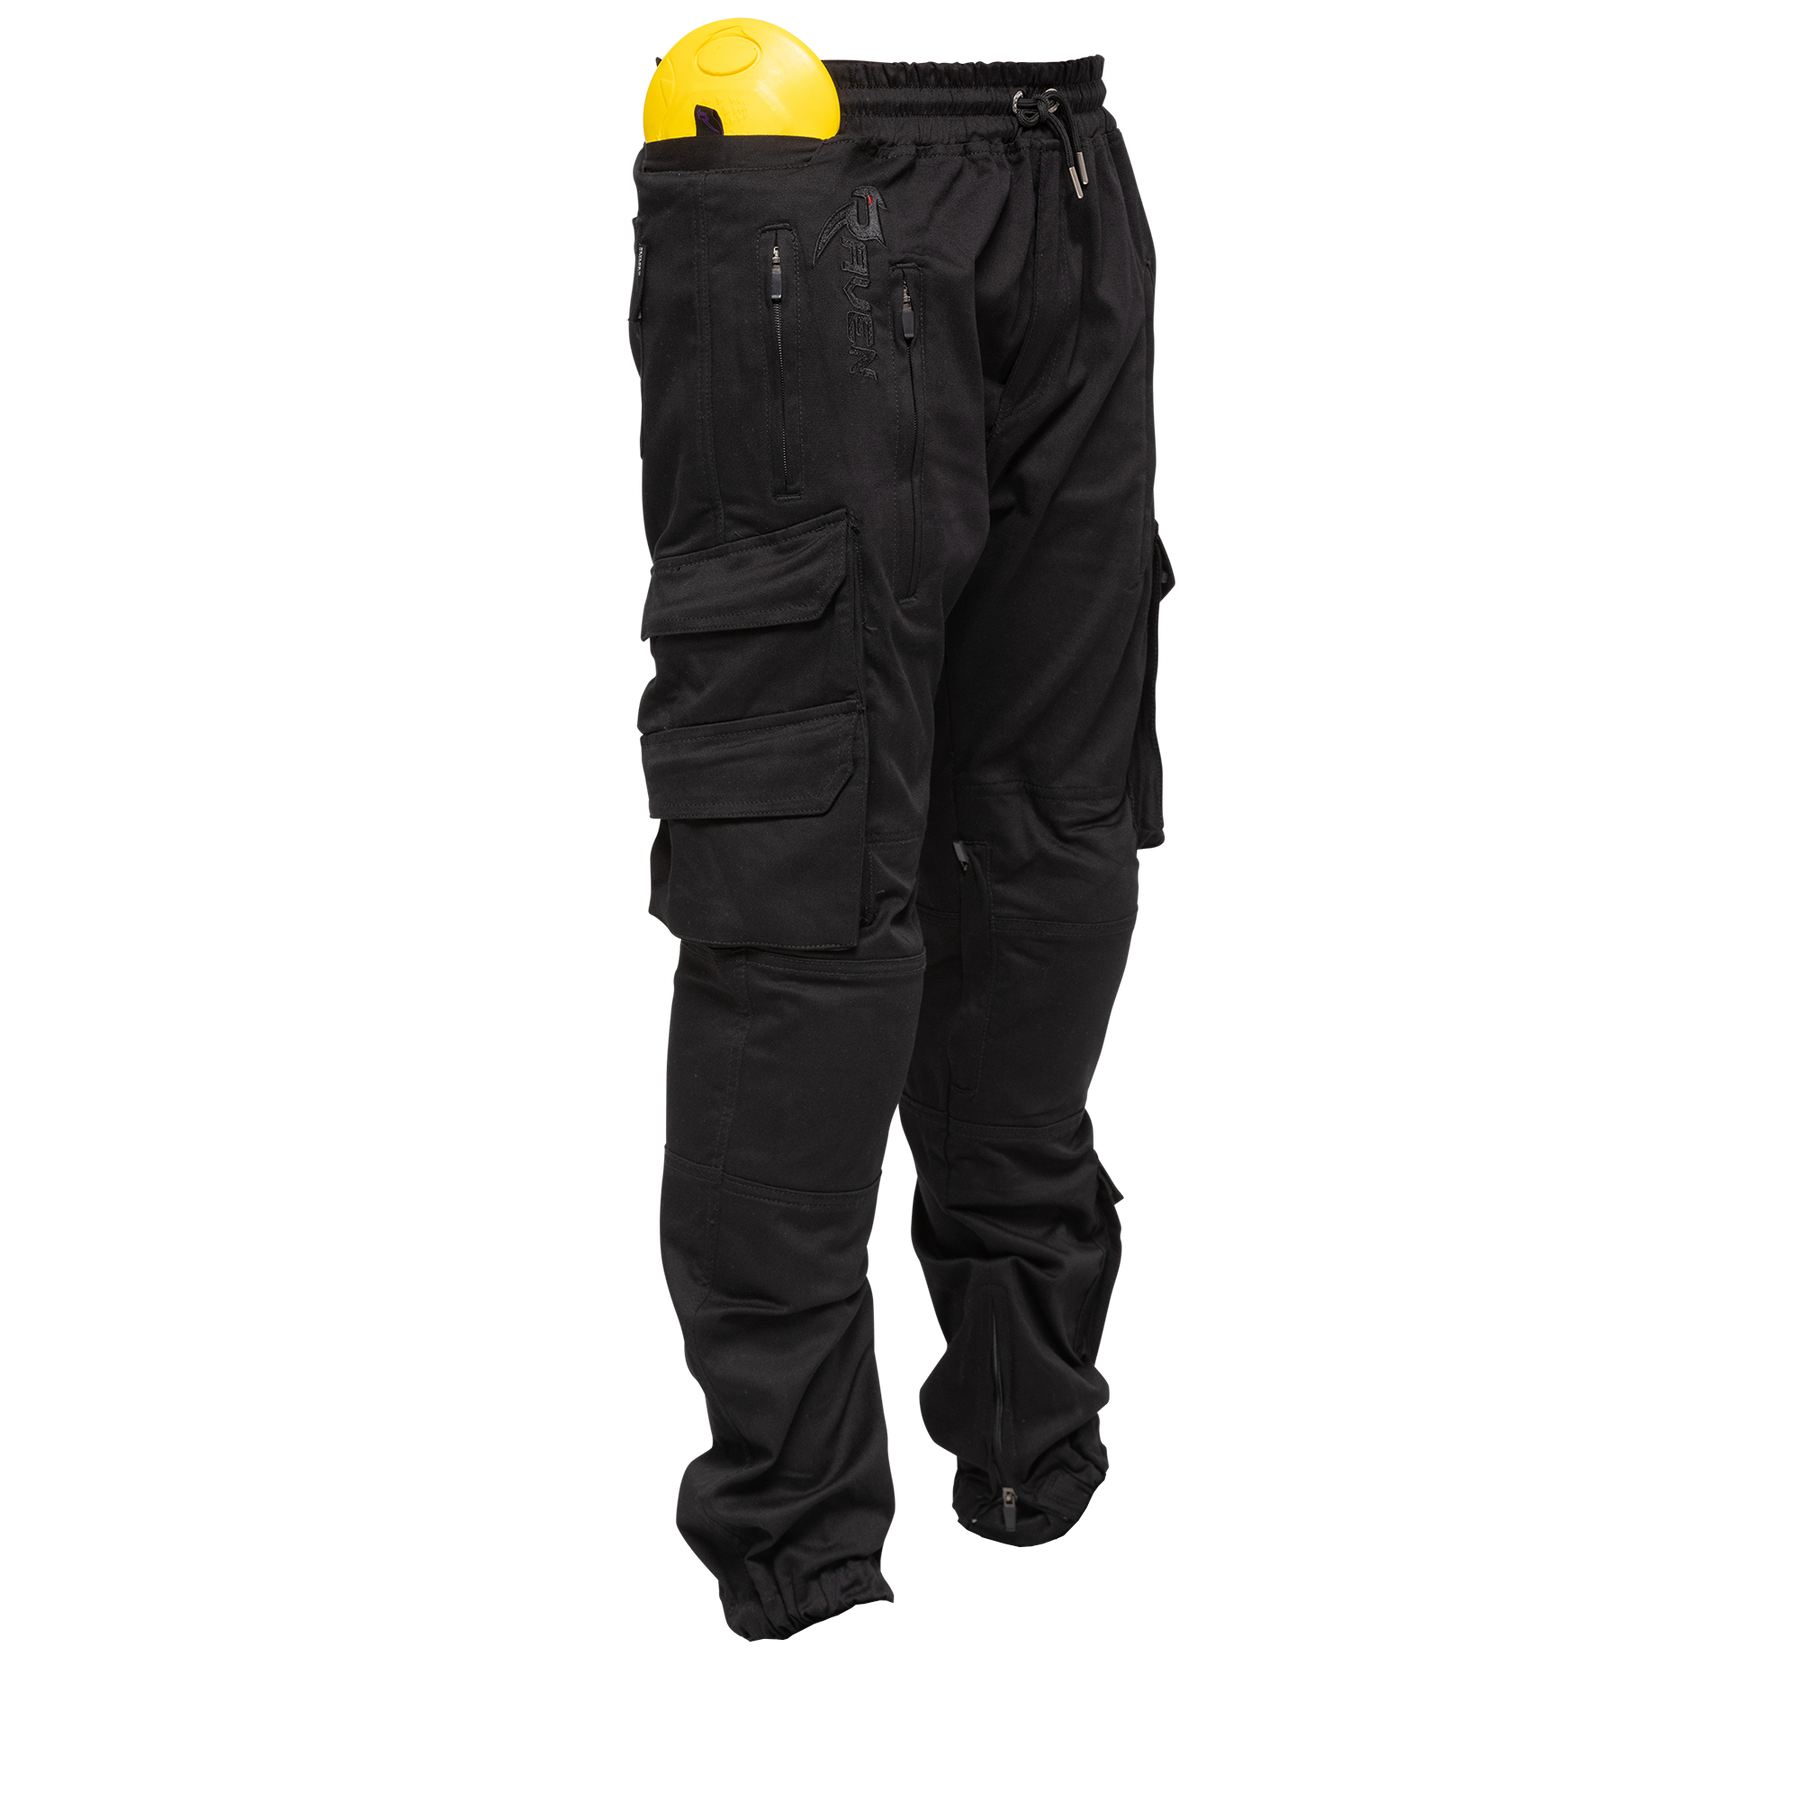 Women Motorcycle Cargo Jeans Pants Reinforced with DuPont™ Kevlar® fiber